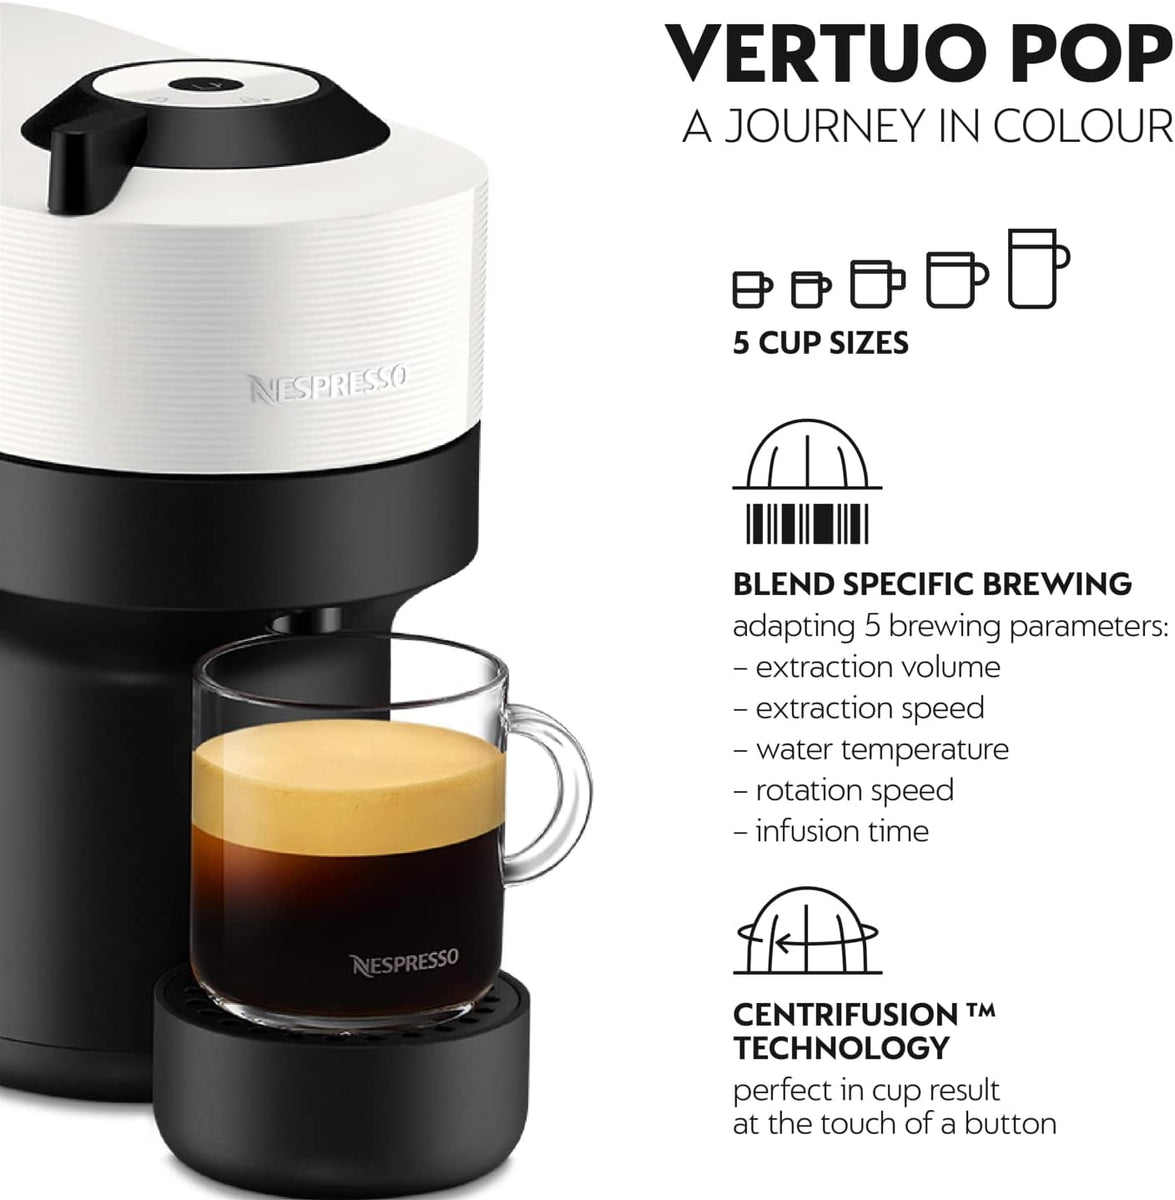 Vertuo POP - add a touch of colour into your life